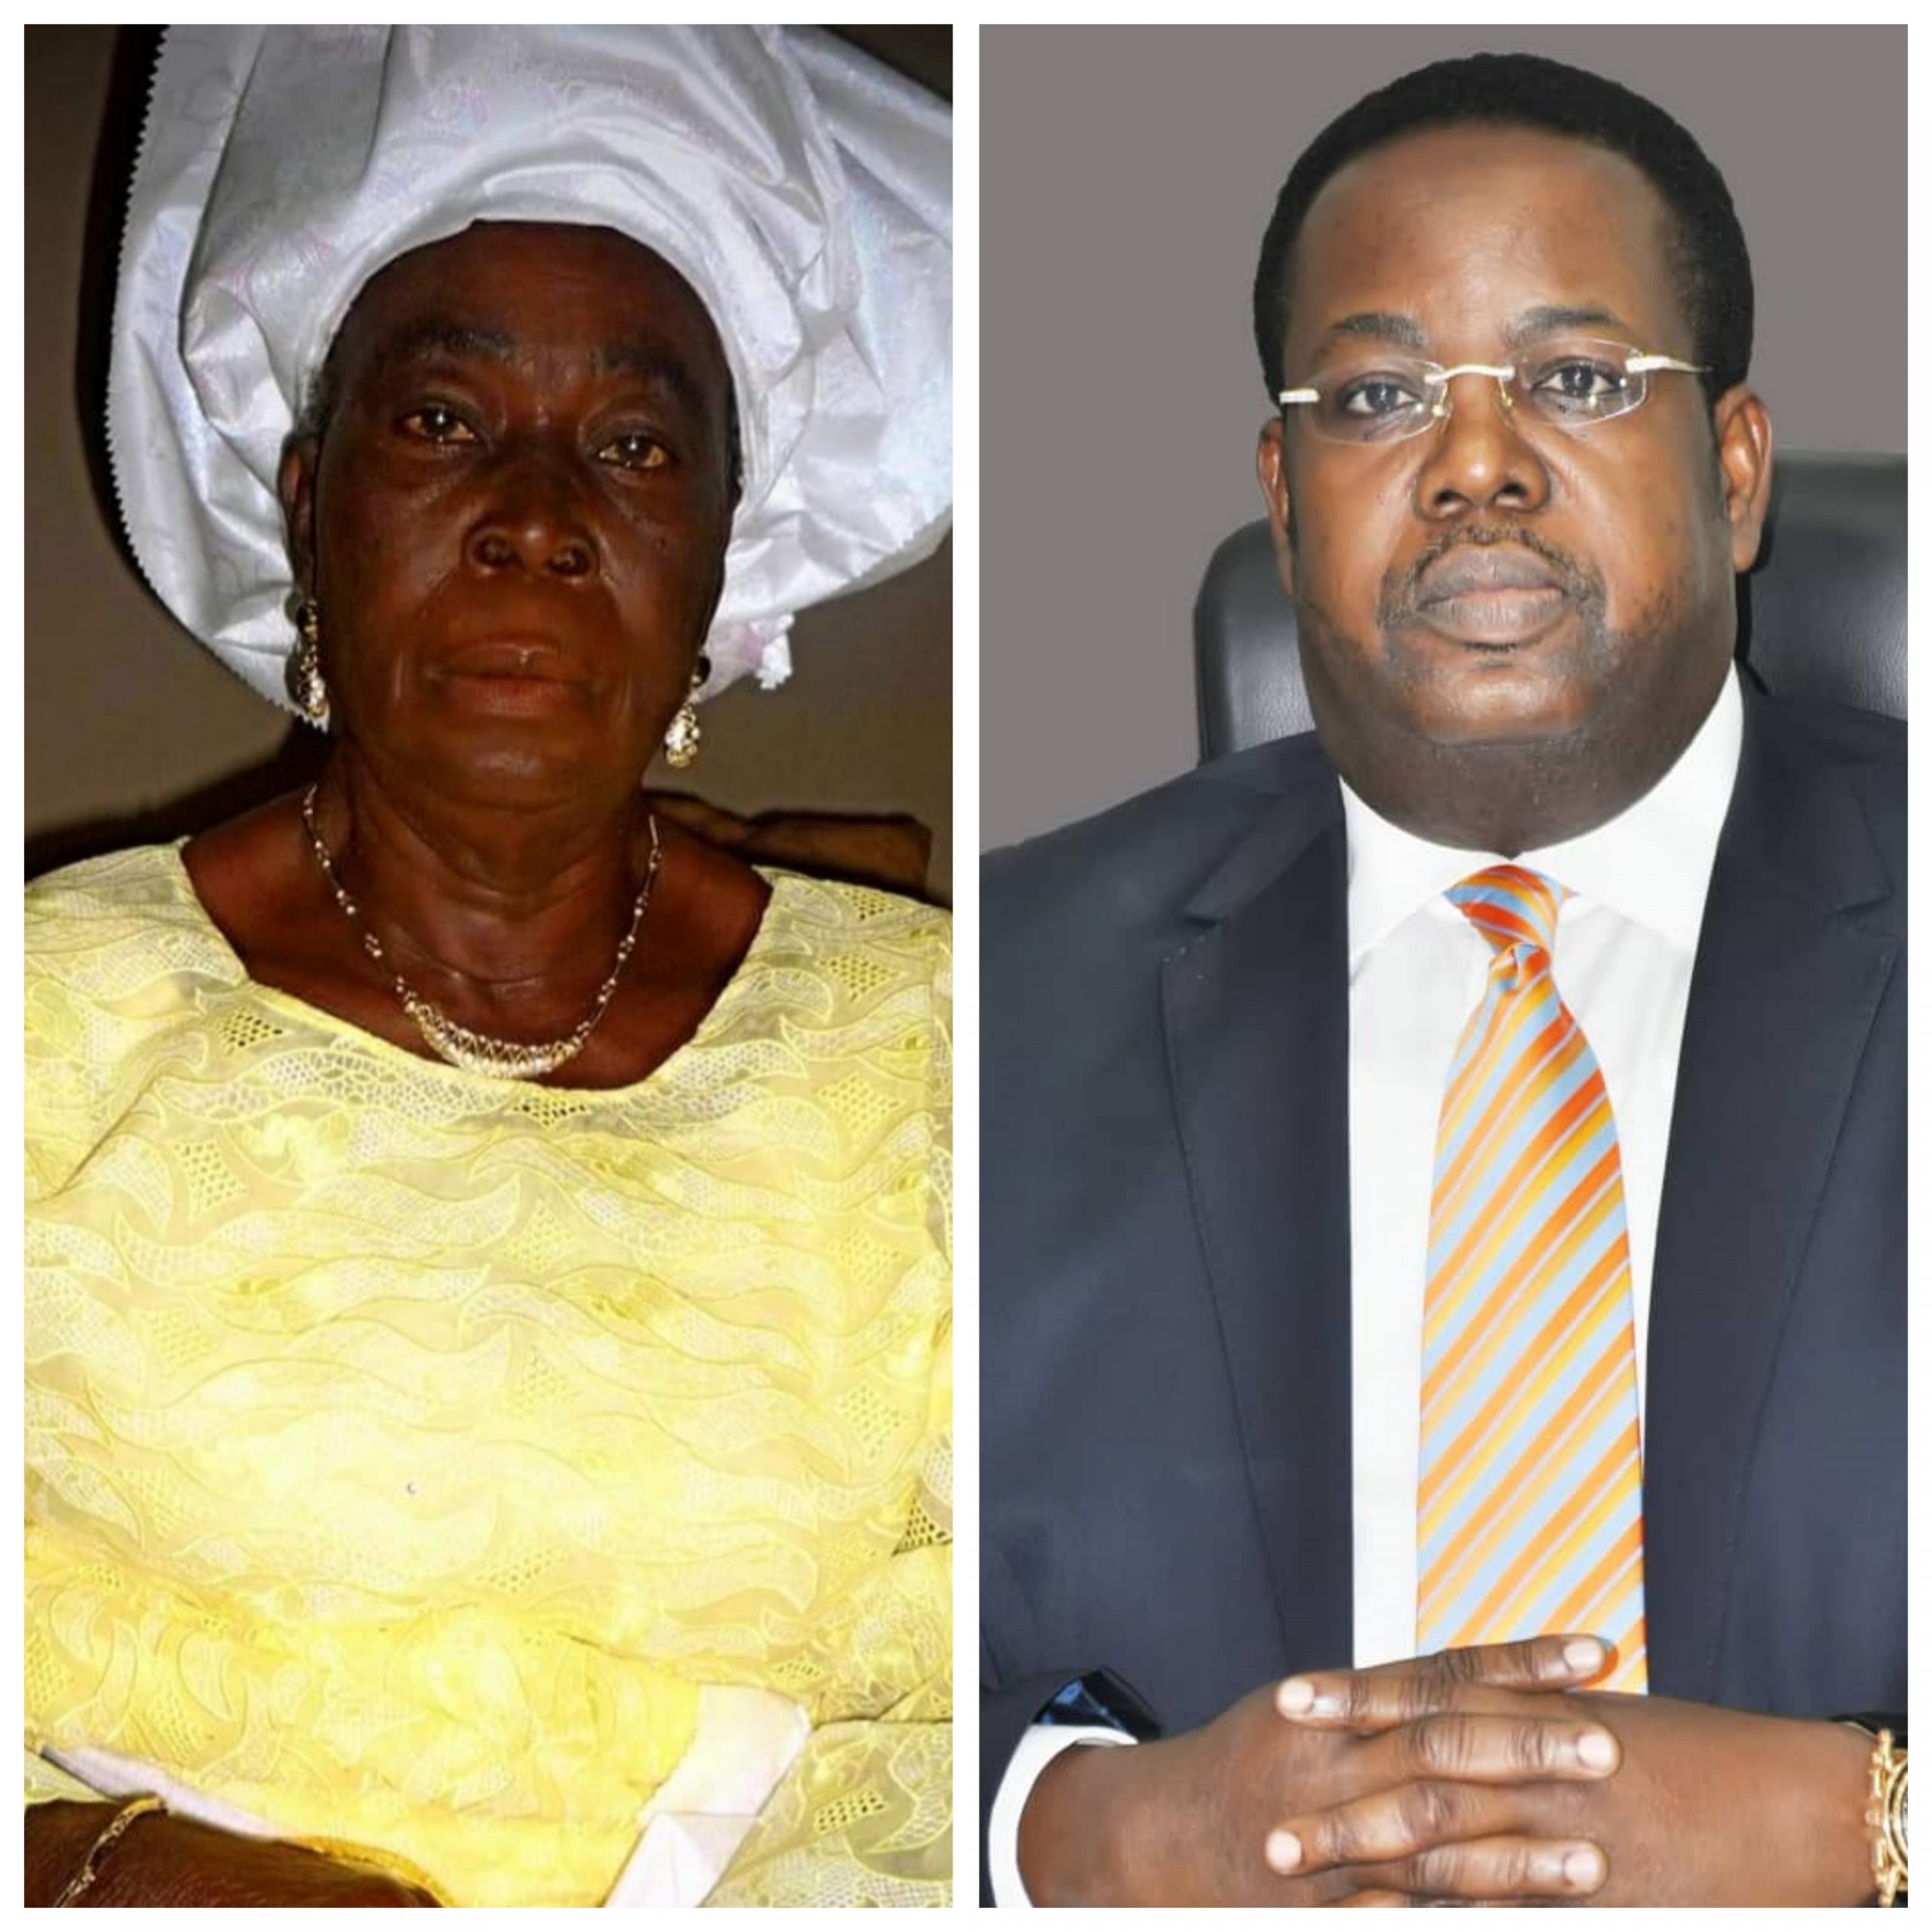 Sanwoolu, First Bank console Address Homes founder, Onasanya over loss of mother